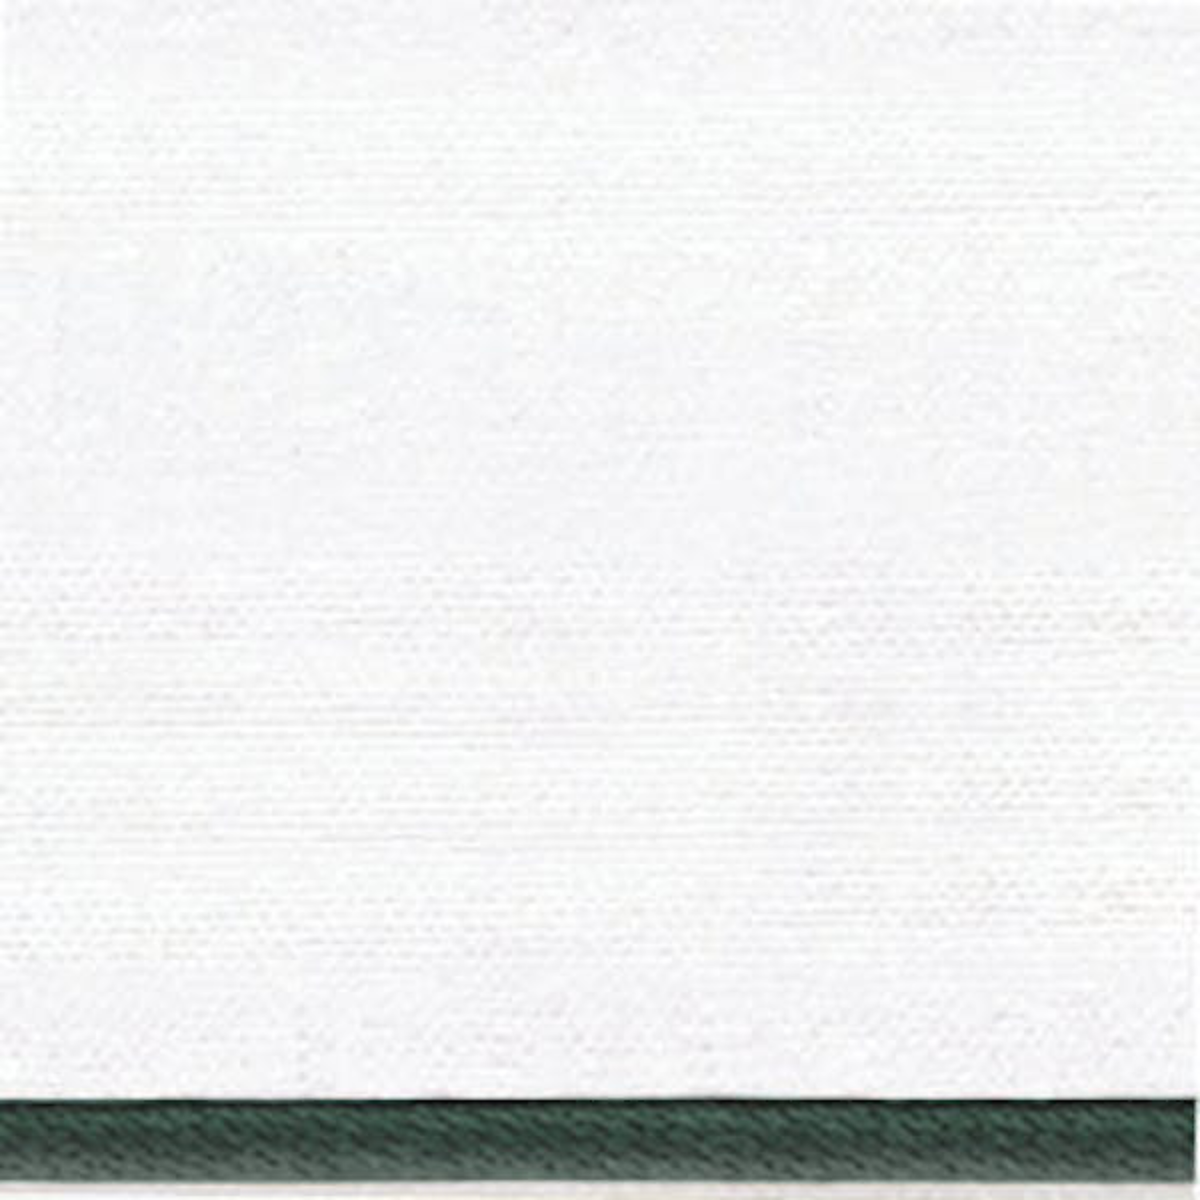 Swatch Sample of Matouk Bryant Bedding in Green Color